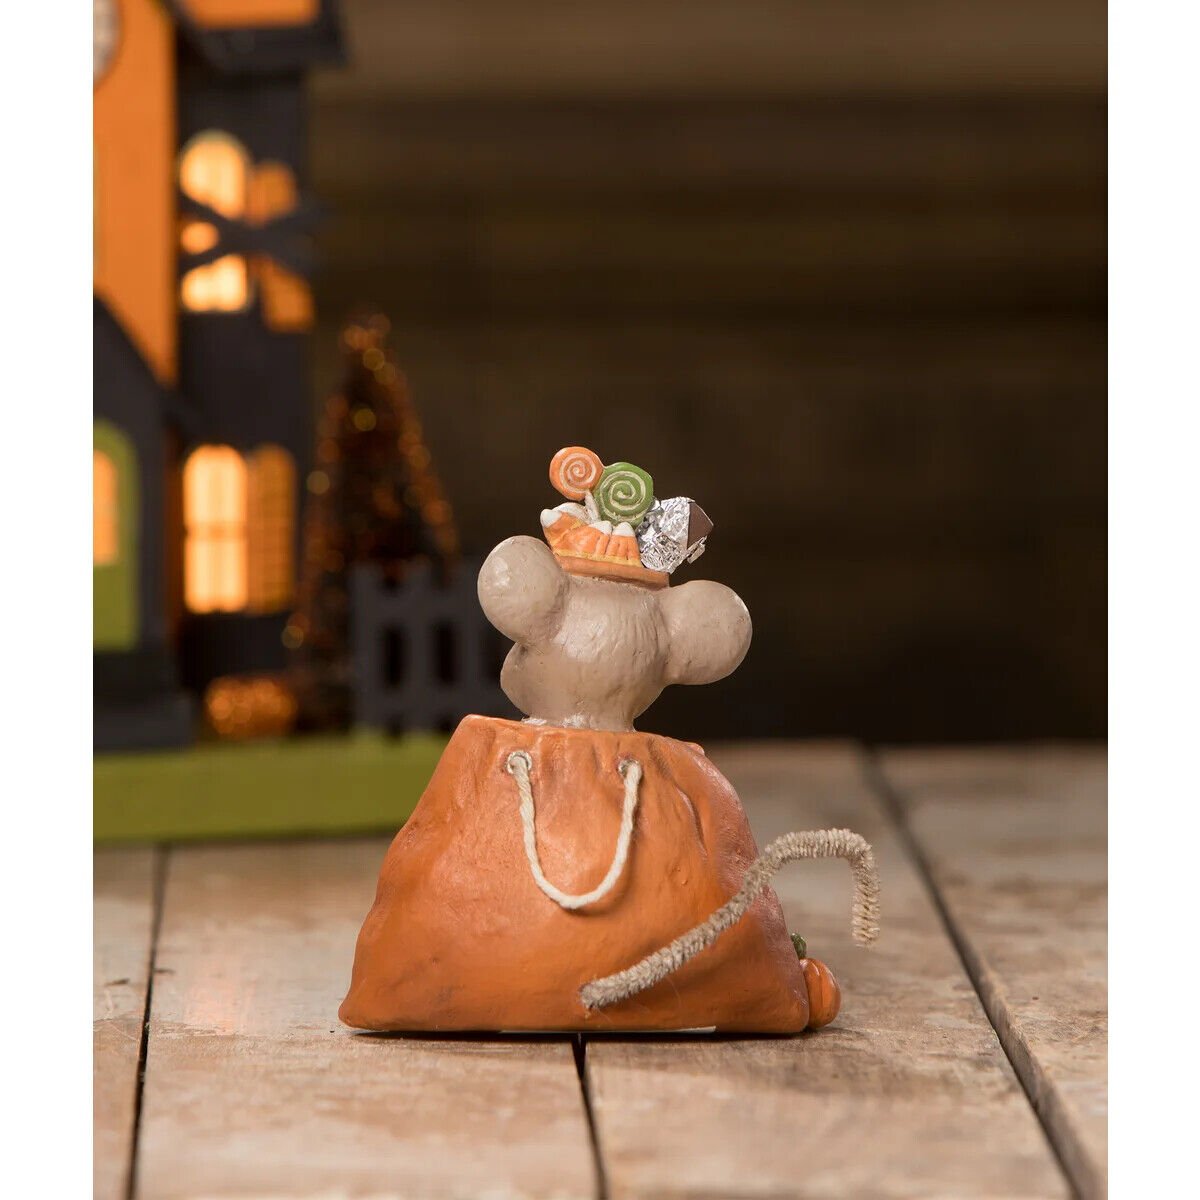 Bethany Lowe Halloween Nibble Mouse Pumpkin Figurine TD0060 - The Primitive Pineapple Collection